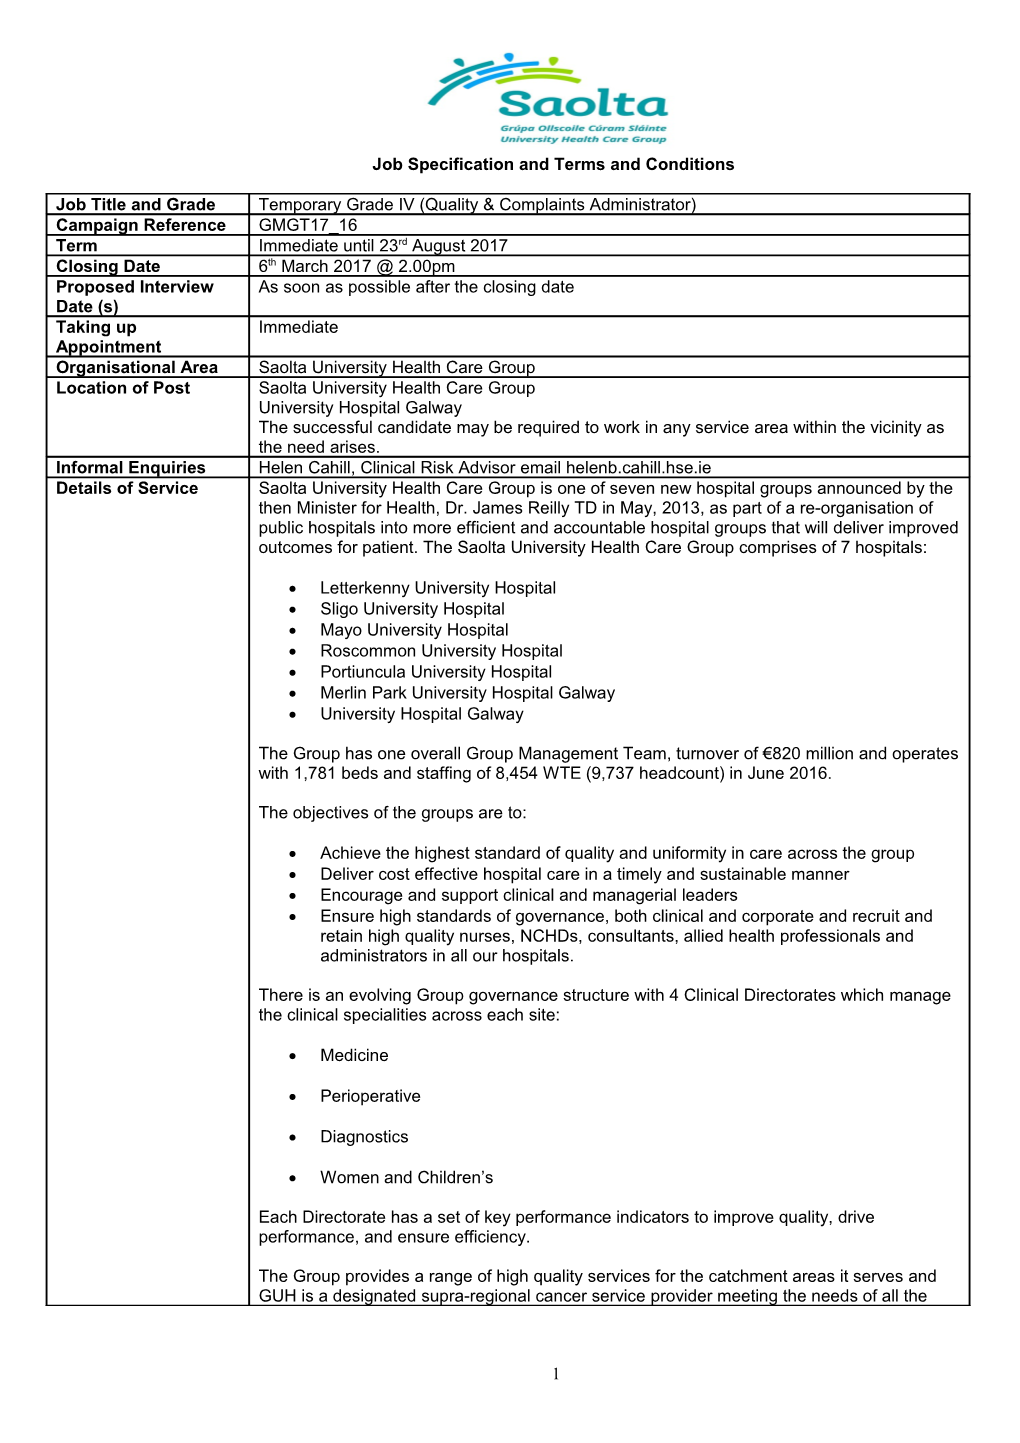 Job Specification and Terms and Conditions s3